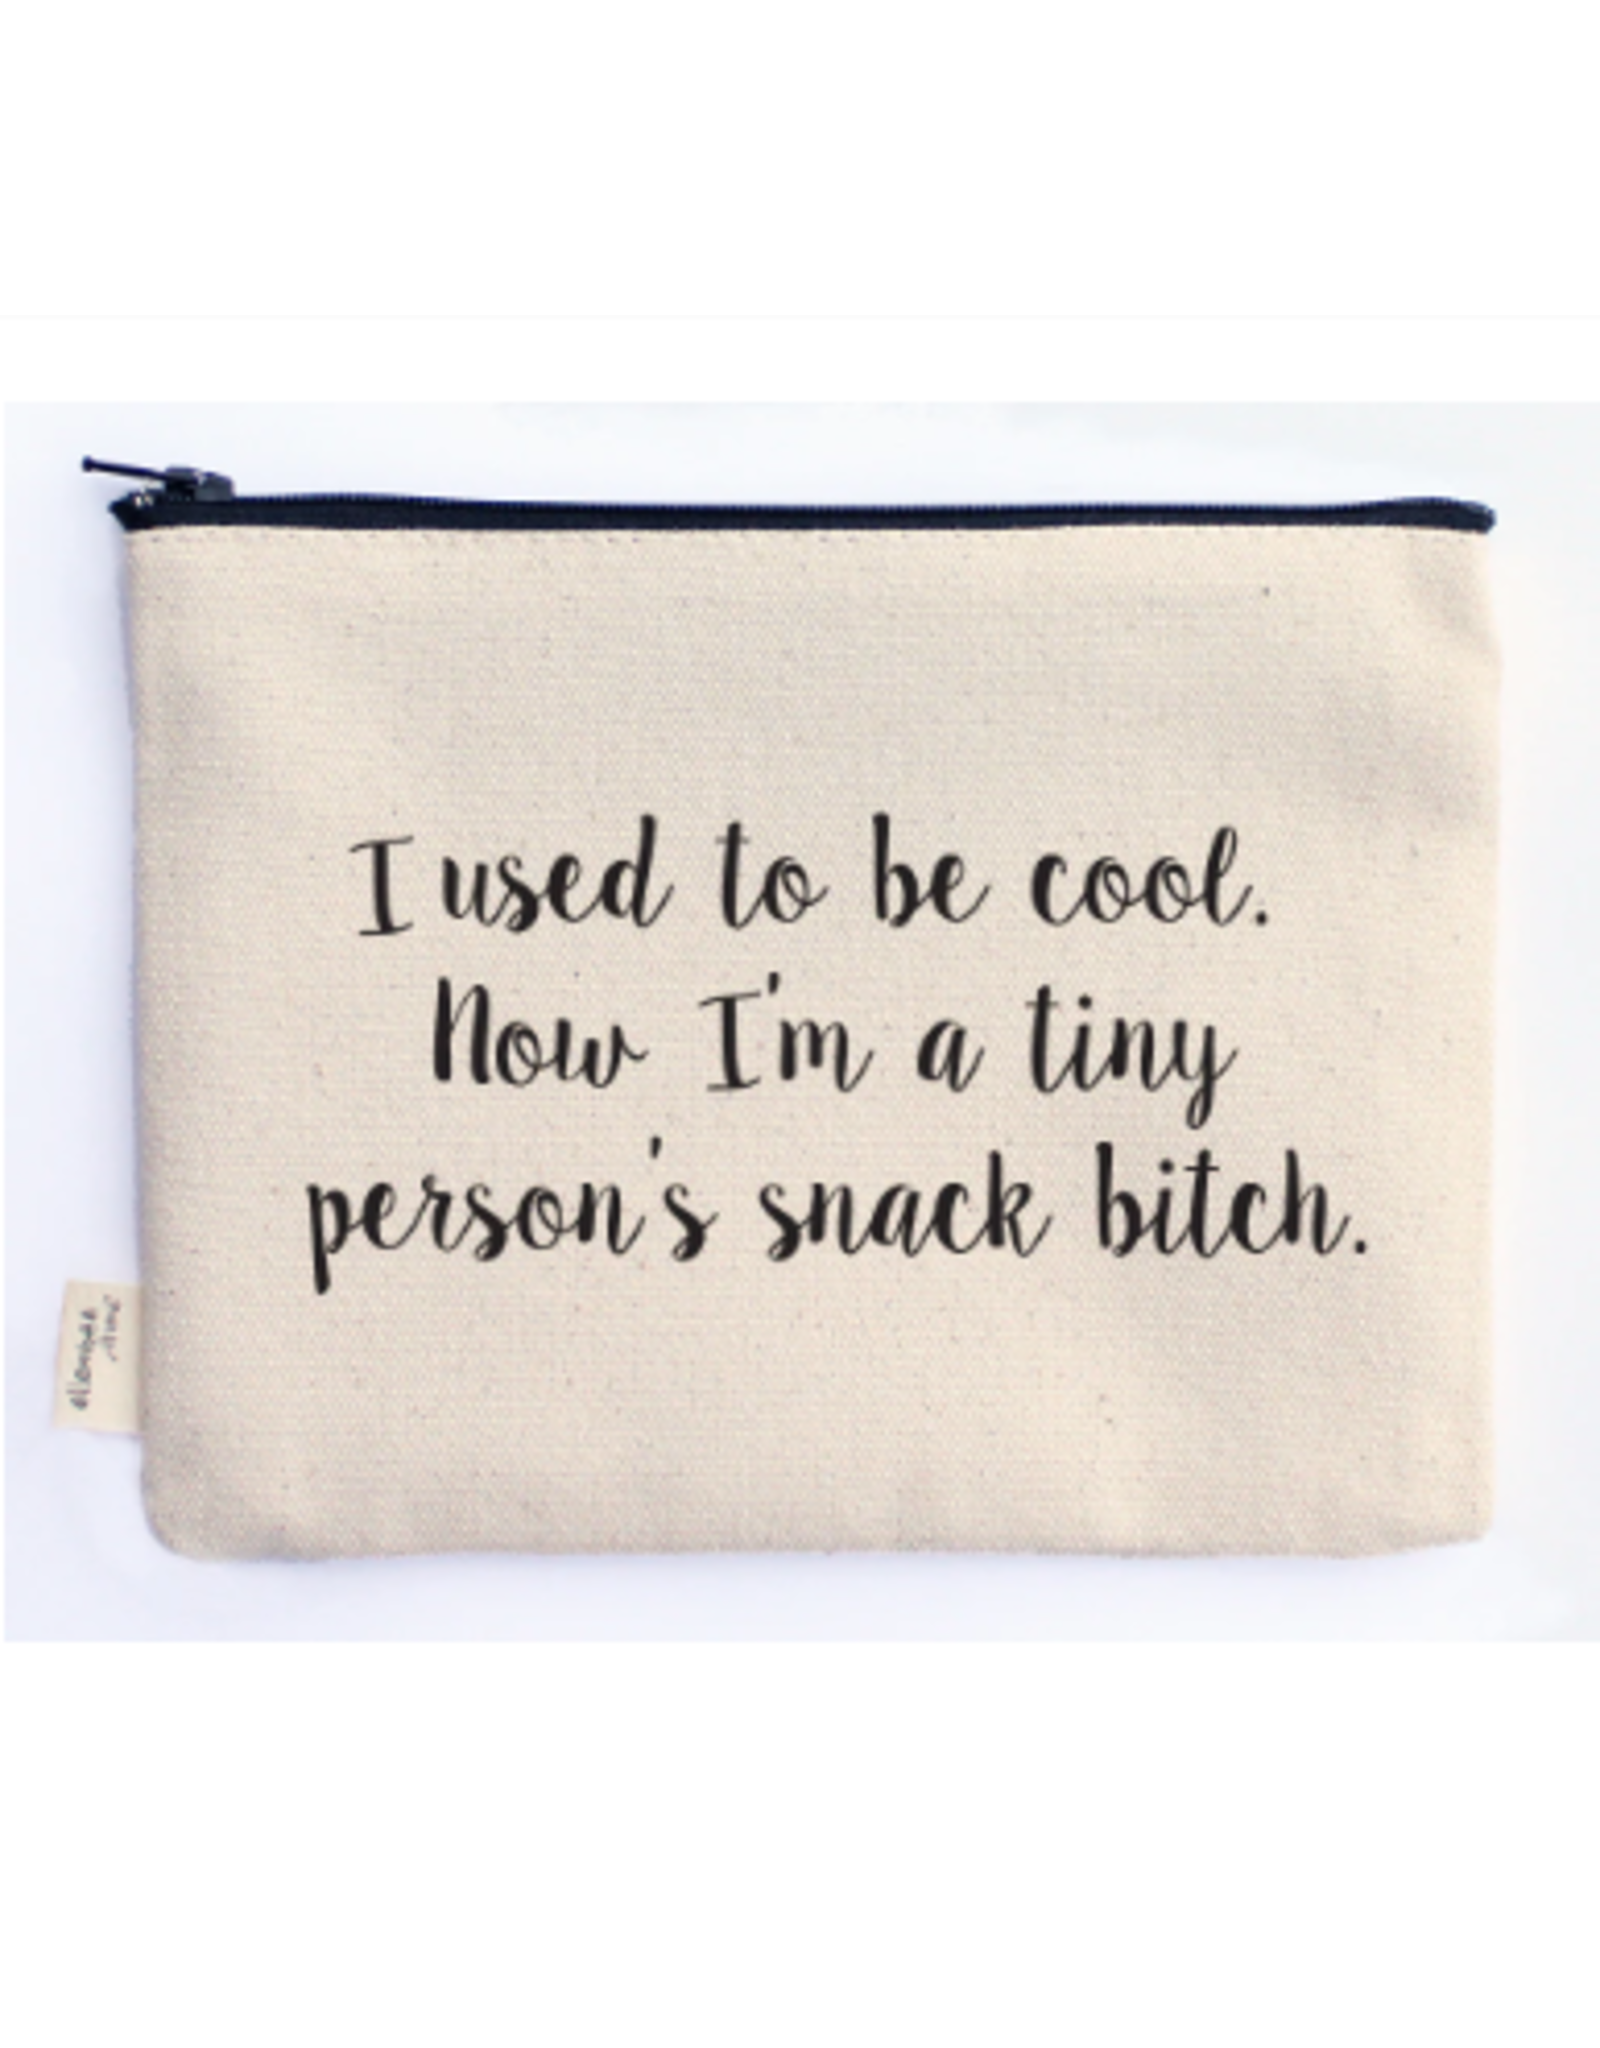 Ellembee Home Zipper Pouch, Tiny Person's Snack Bitch